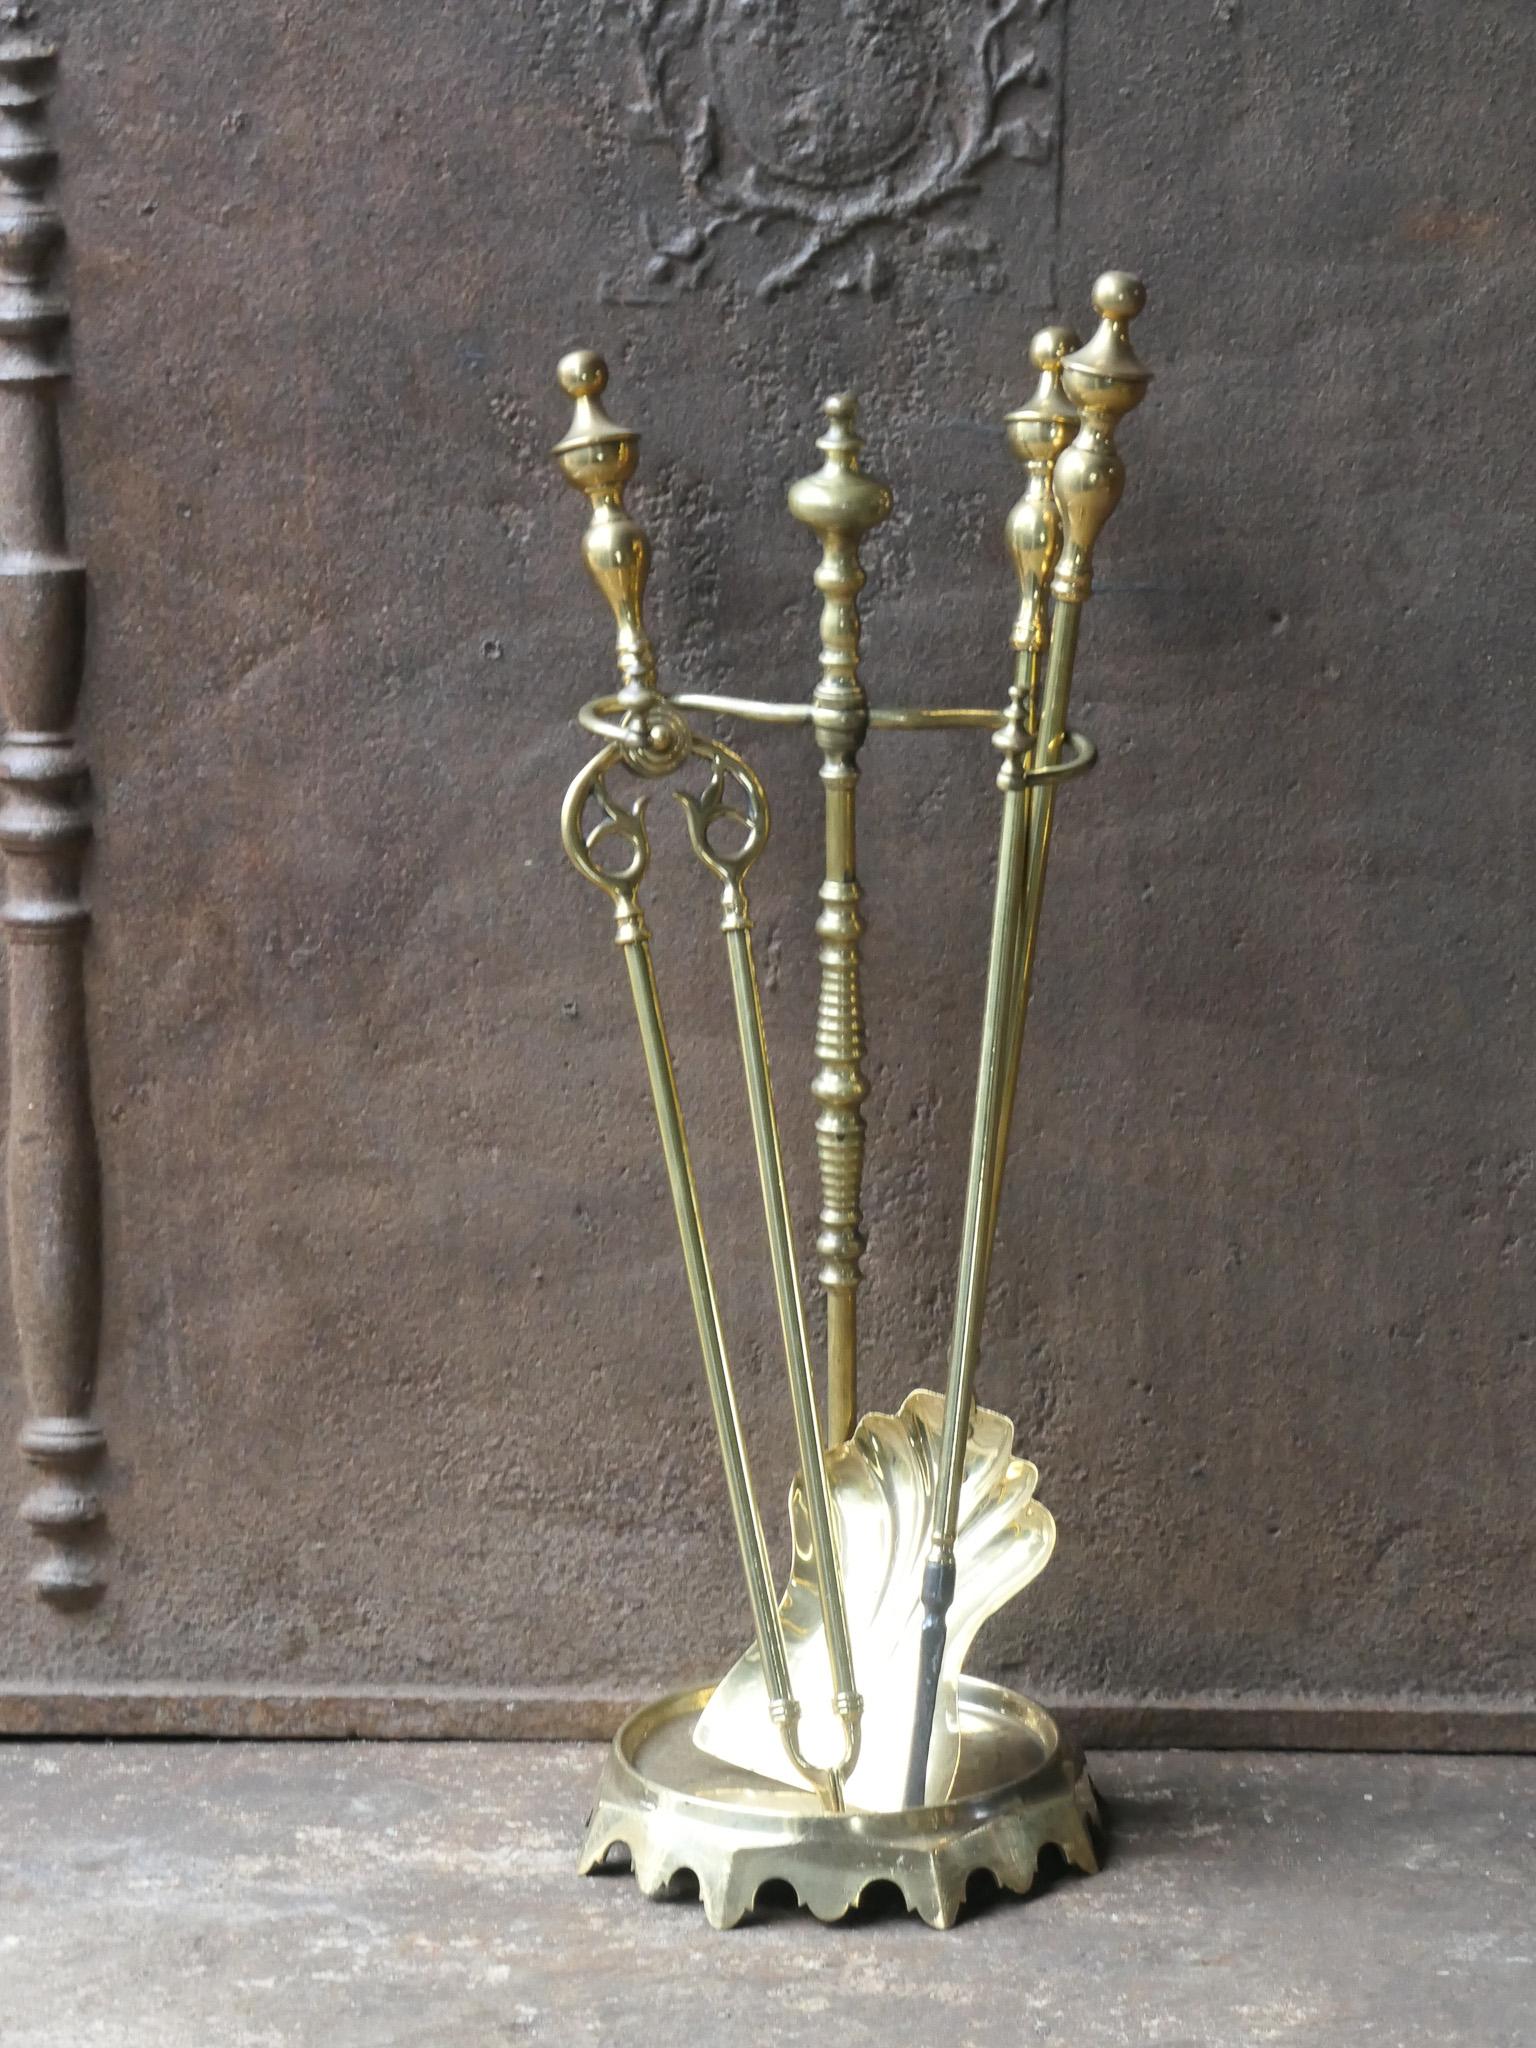 19th century French fireplace tool set. Napoleon III period. The tool set consists of tongs, shovel, poker and a stand. It is made of brass. The set is in a good condition. Fit for use in the fireplace.